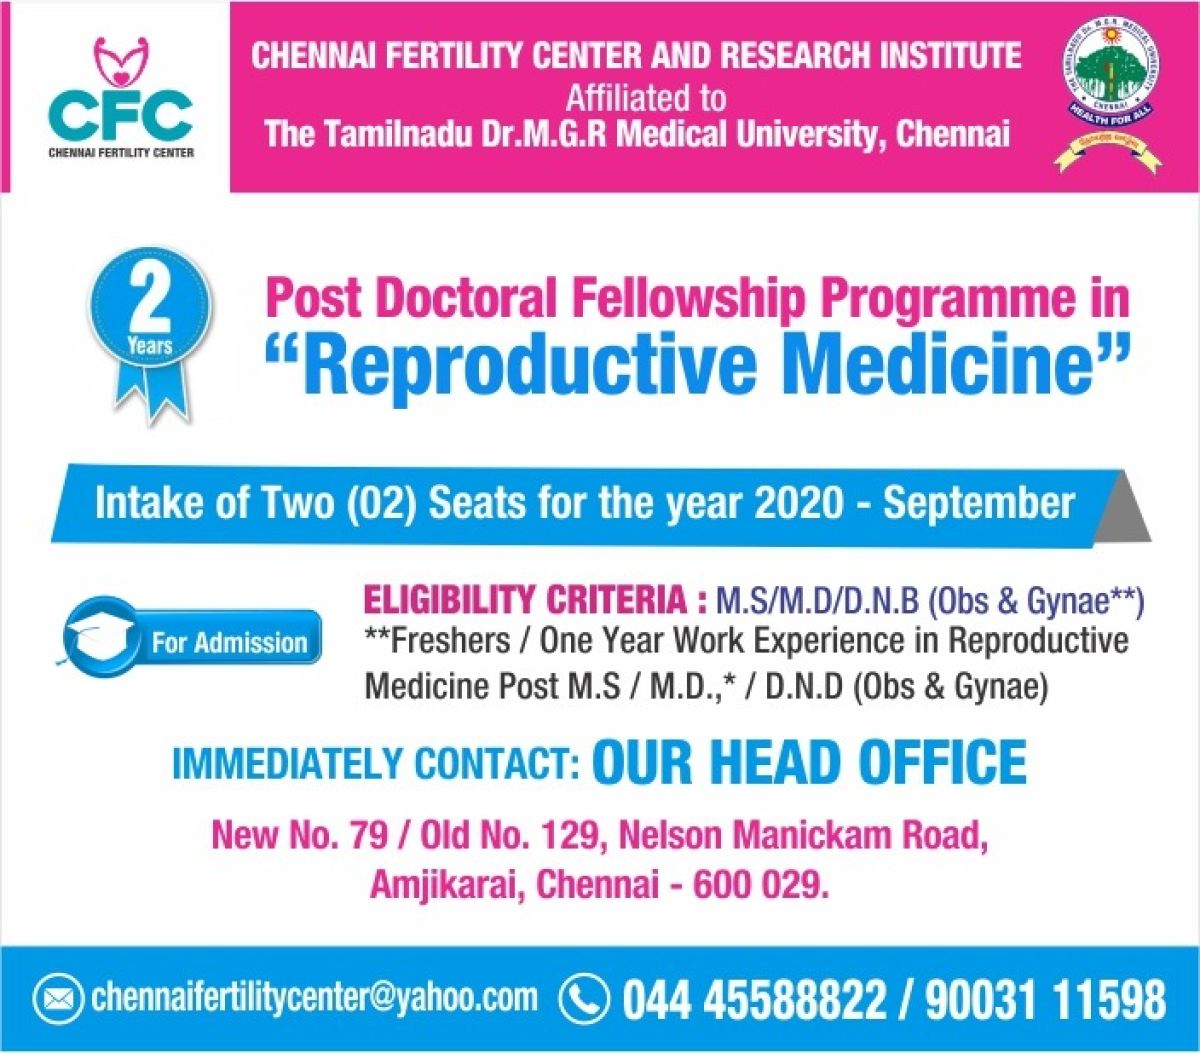 Post Doctoral Fellowship Programme in "Reproductive Medicine"